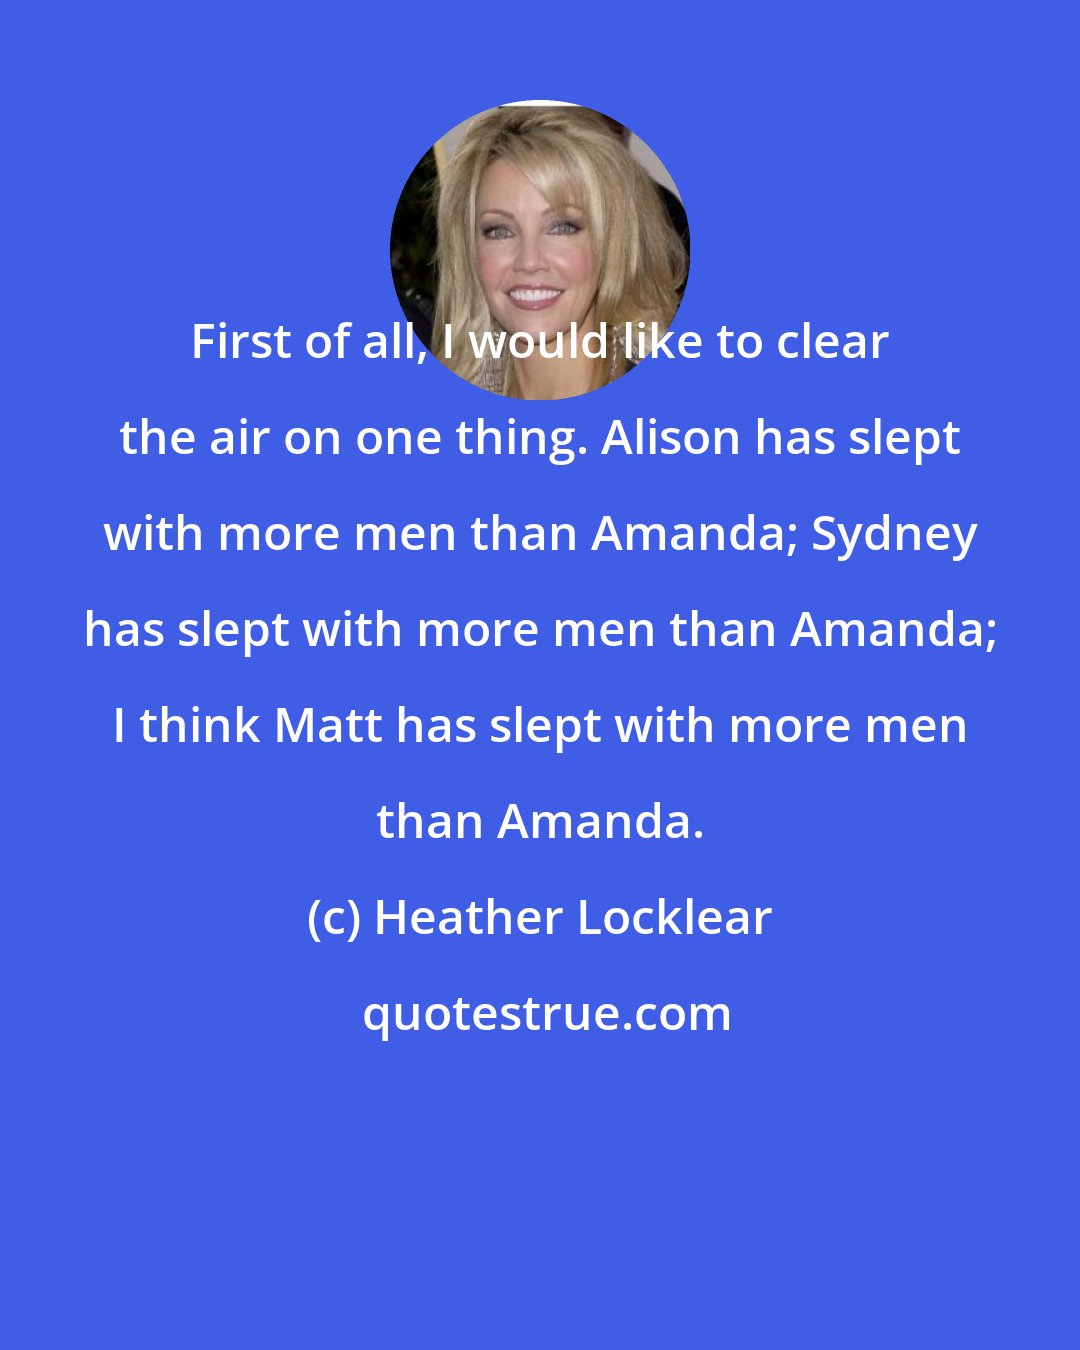 Heather Locklear: First of all, I would like to clear the air on one thing. Alison has slept with more men than Amanda; Sydney has slept with more men than Amanda; I think Matt has slept with more men than Amanda.